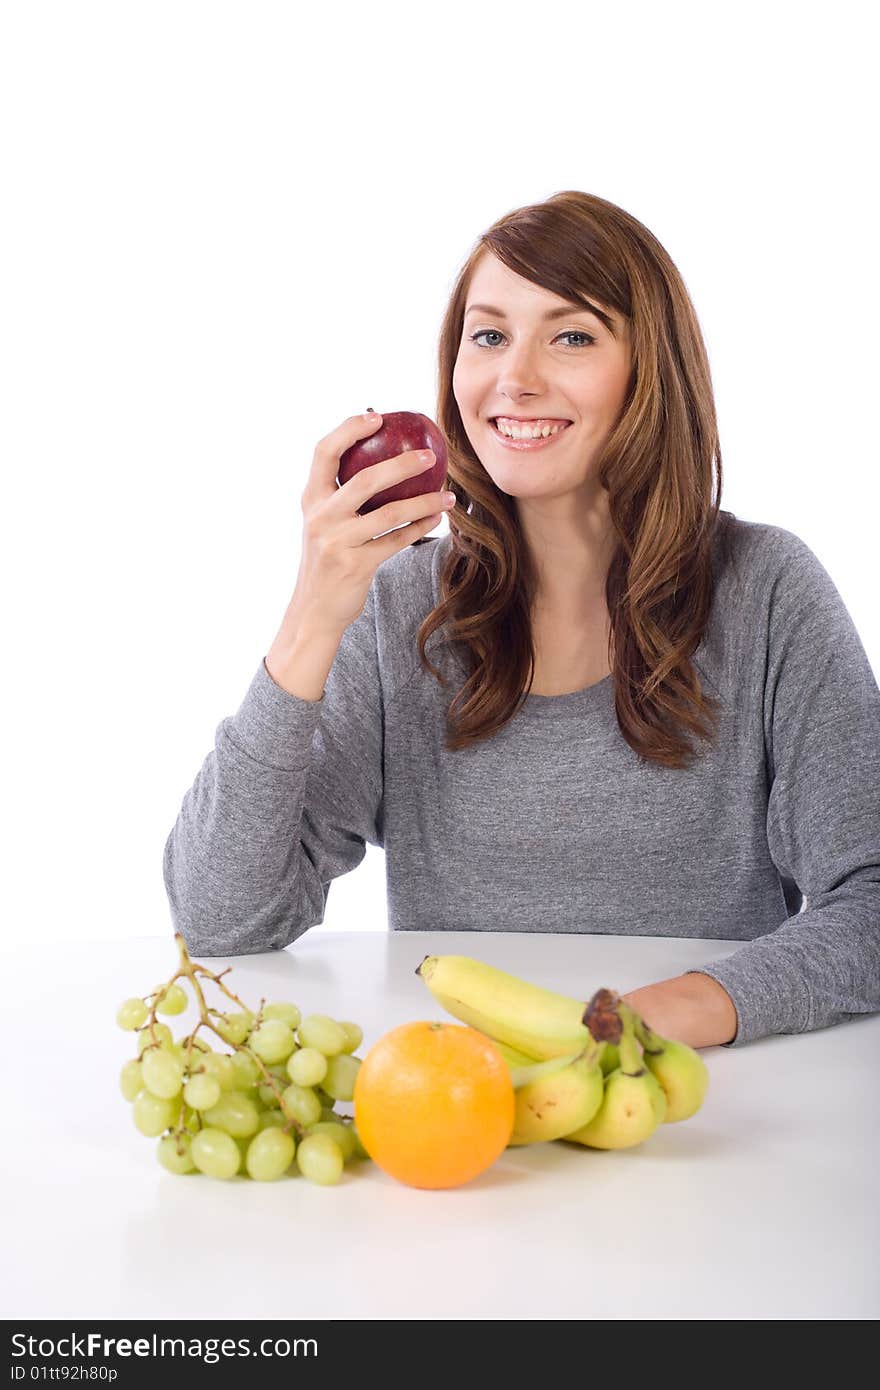 Woman eating fruit in a modern kitchen. Woman eating fruit in a modern kitchen